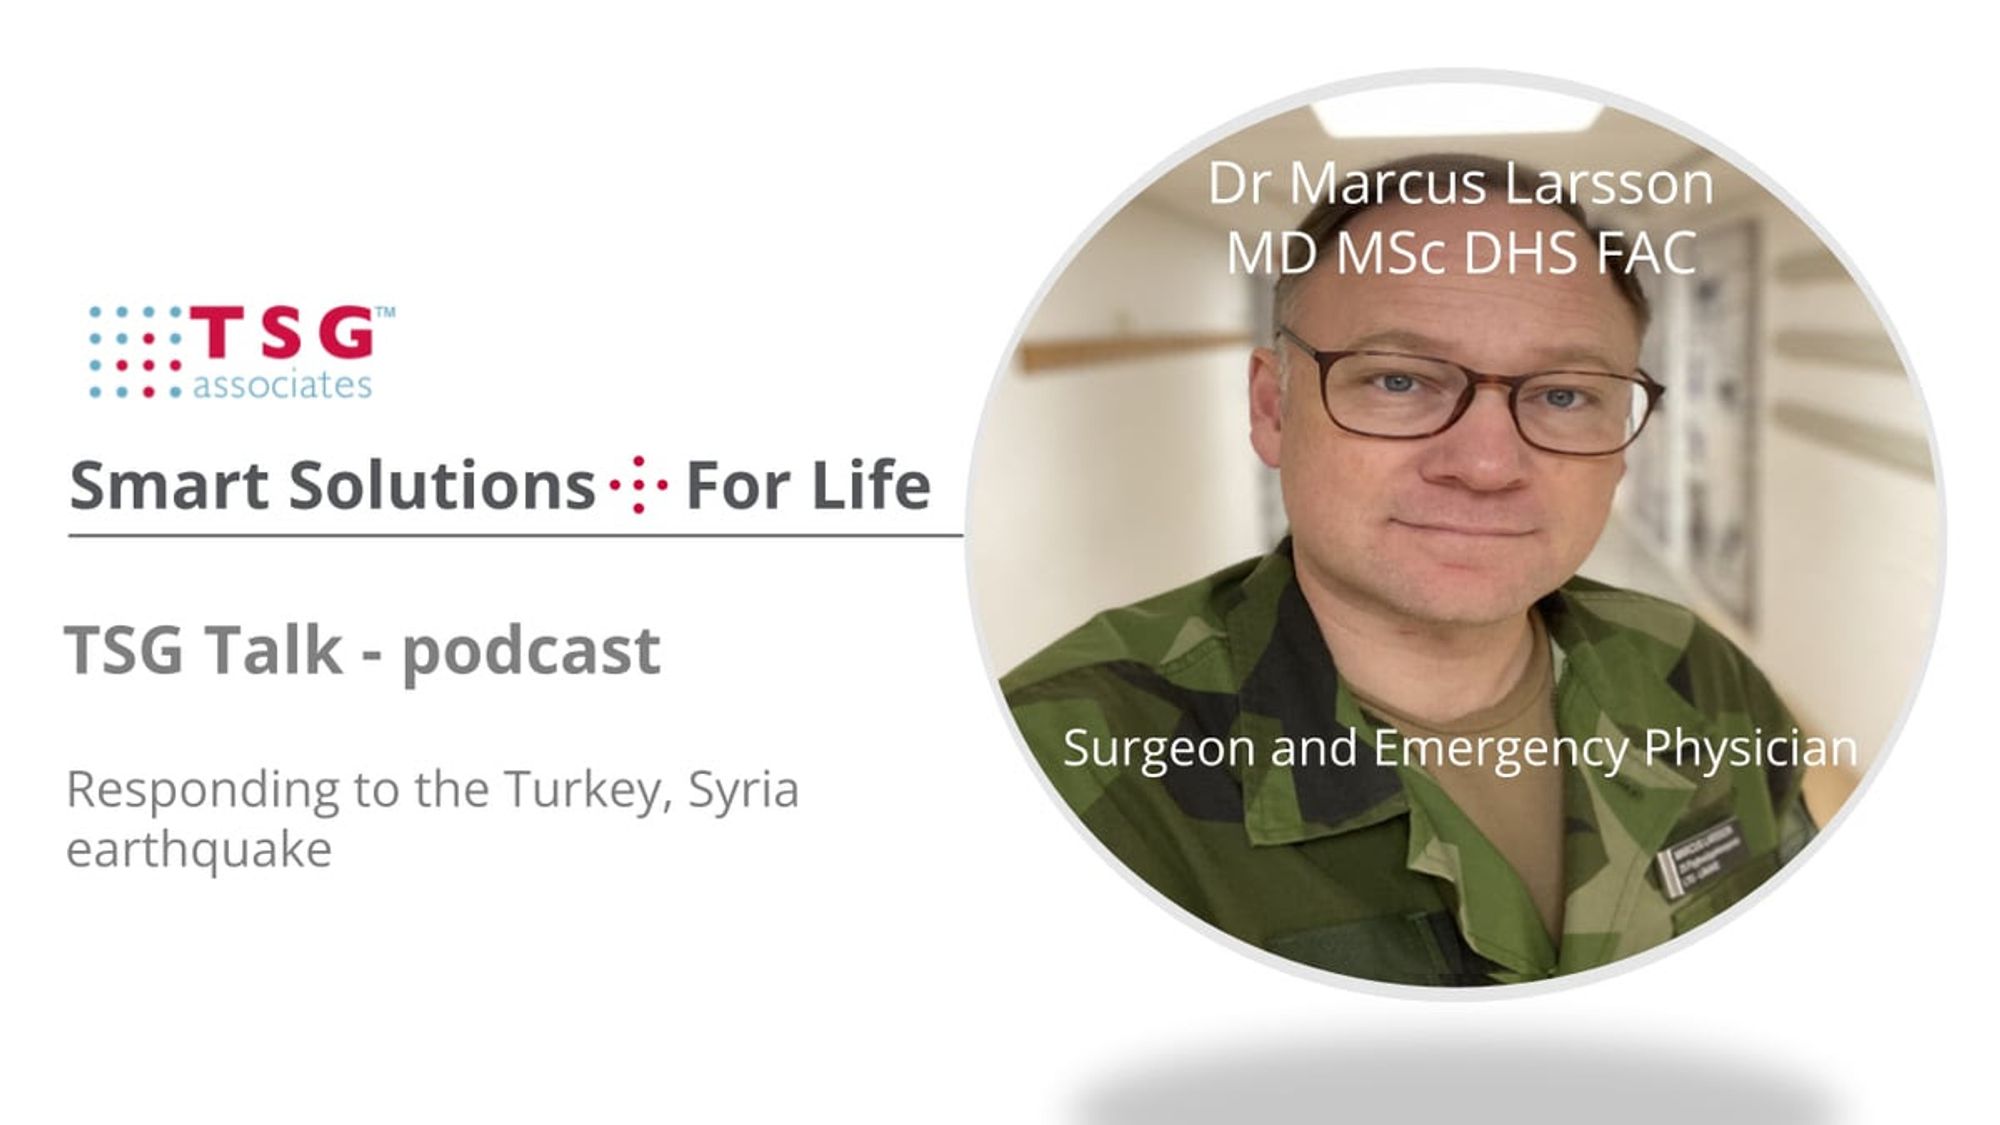 TSG Talk- Delivering medical aid to the Turkey/Syria earthquakes